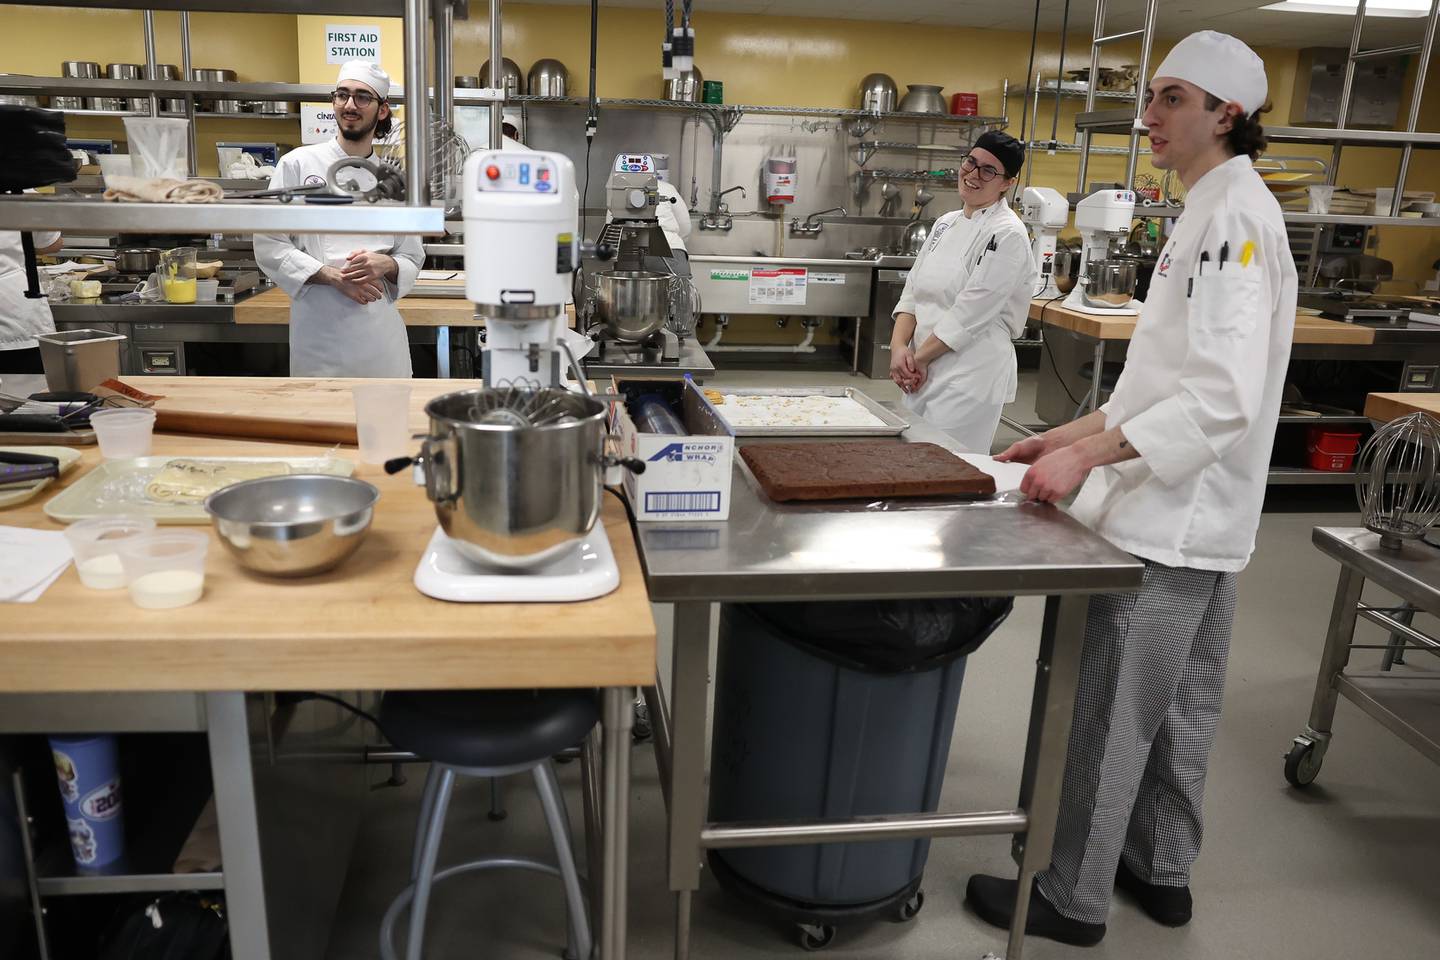 Student Jac Sayegh (left), Gena Shaw and Than Petrakis attend one of Chef Andy Chlebana pastry classes at the Joliet Junior College City Center Campus on Wednesday, March 1st, 2023. Andy has won numerous awards, including 1st place in two competitive television series on the Food Network.